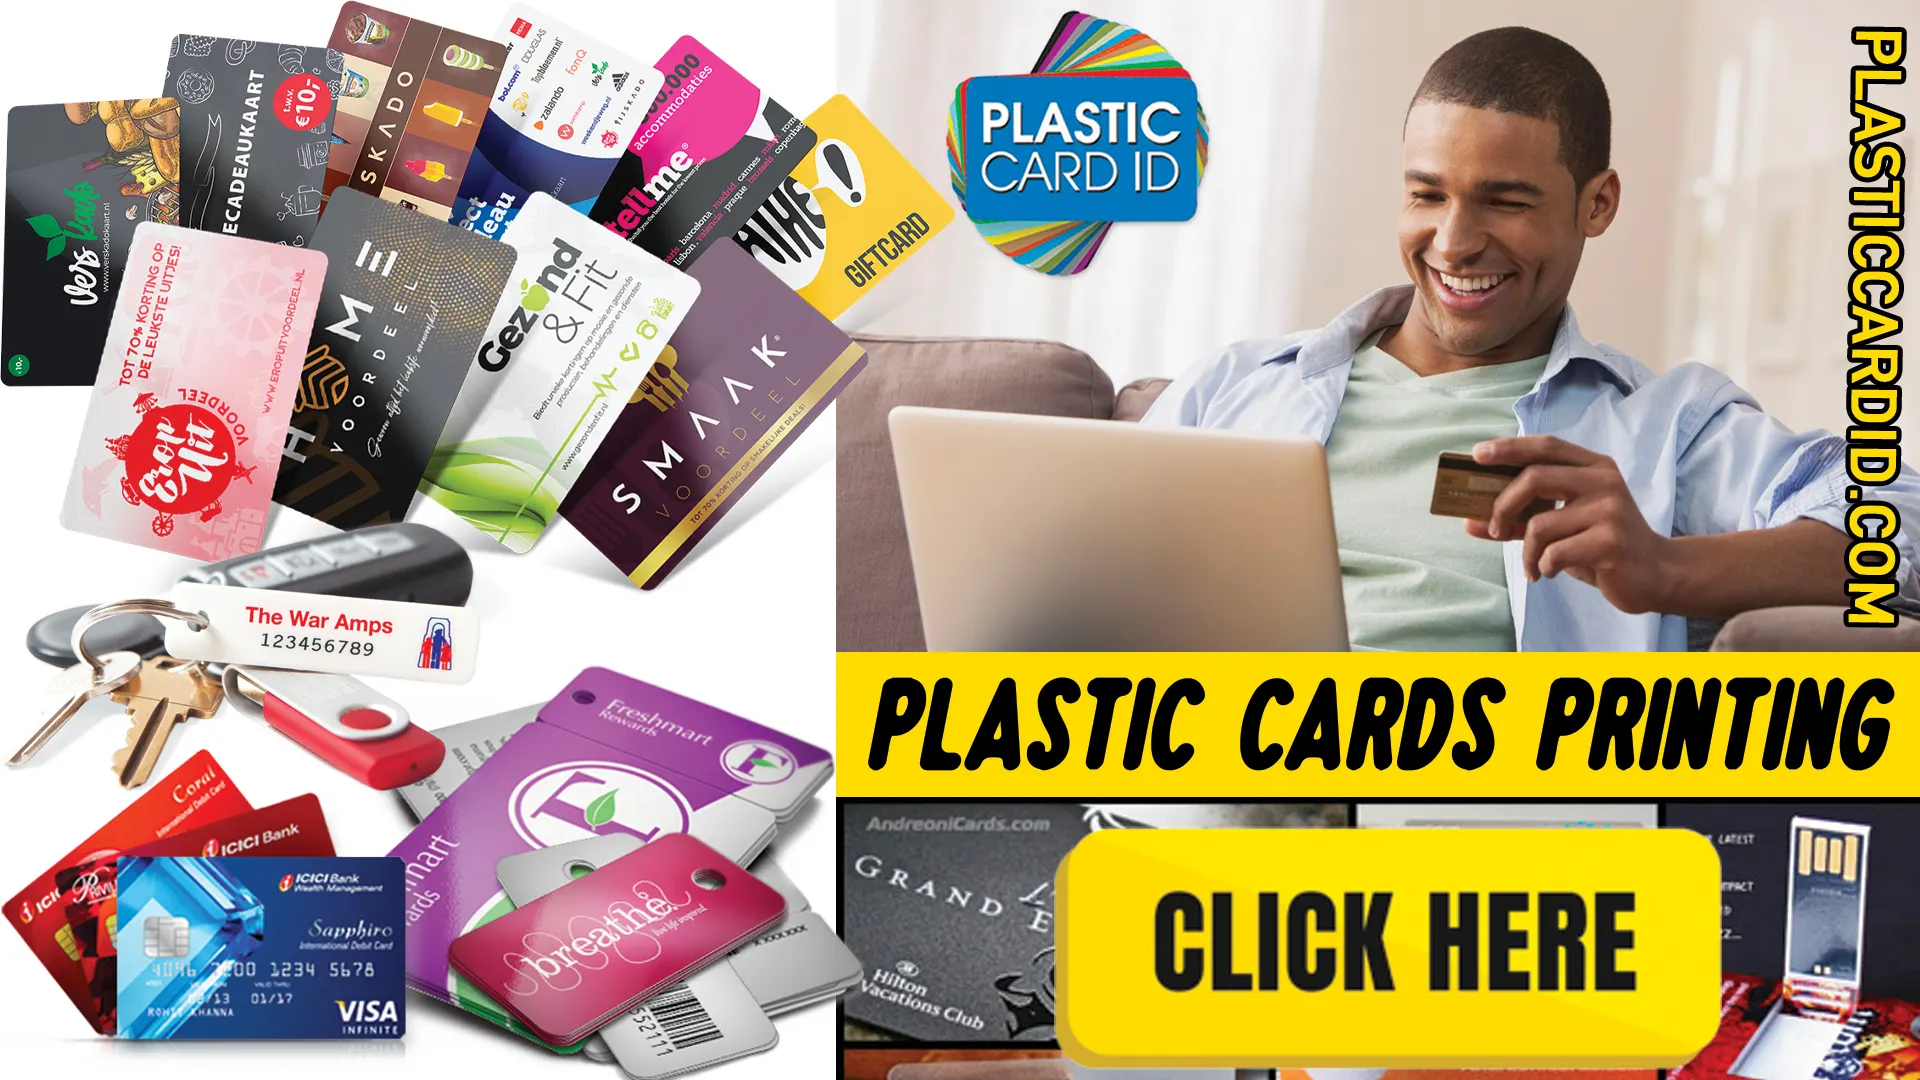 Plastic Cards: The Functional and Fashionable Choice